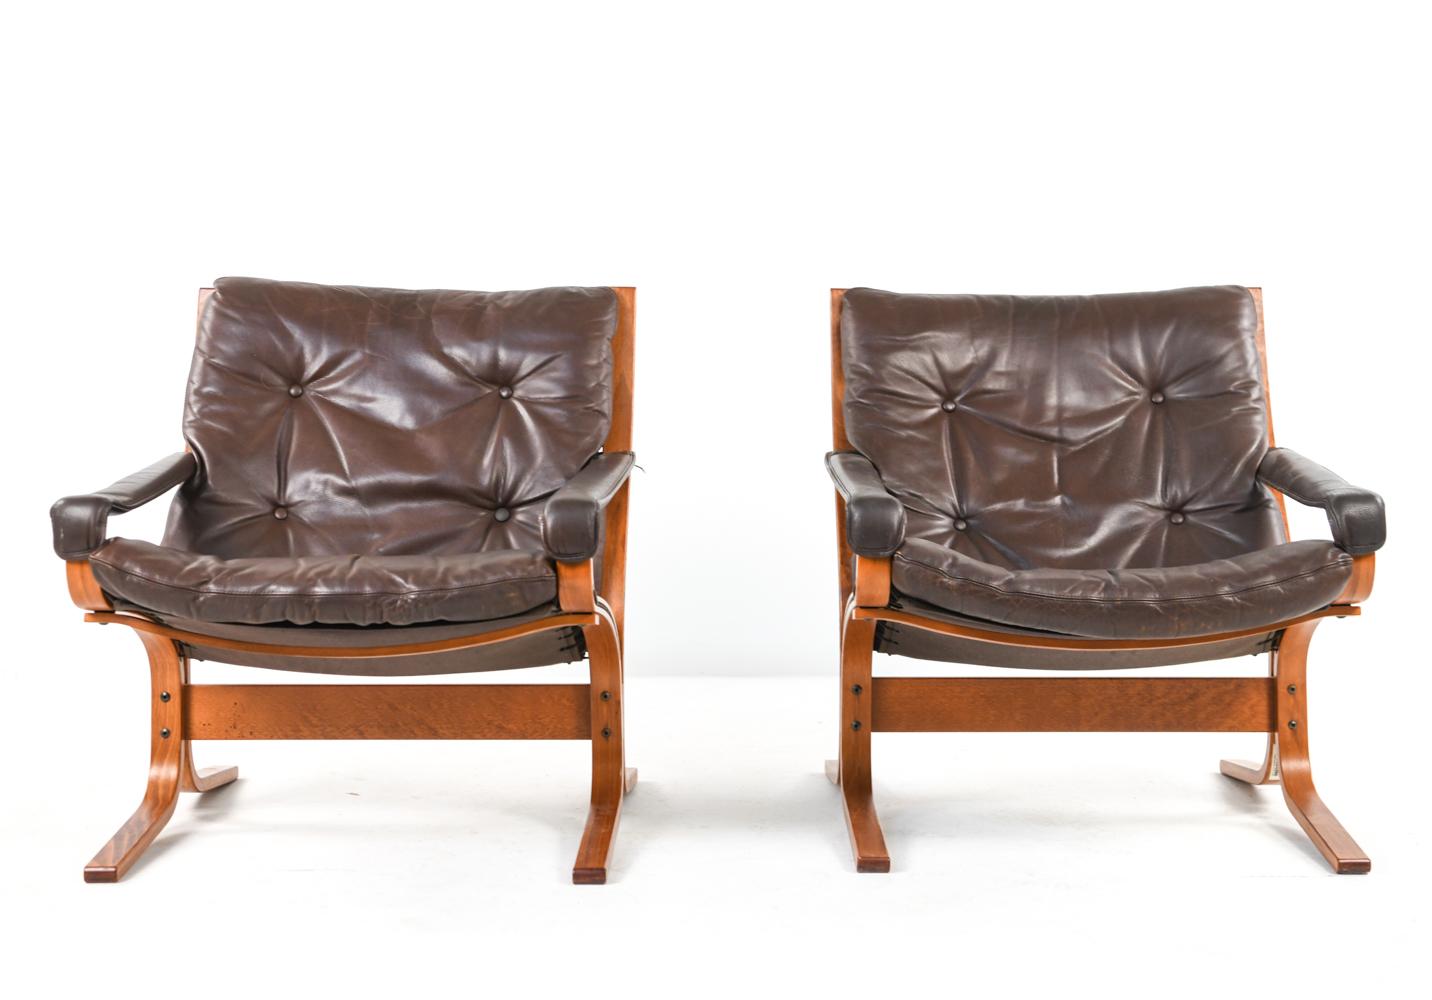 A pair of iconic Norwegian modern 